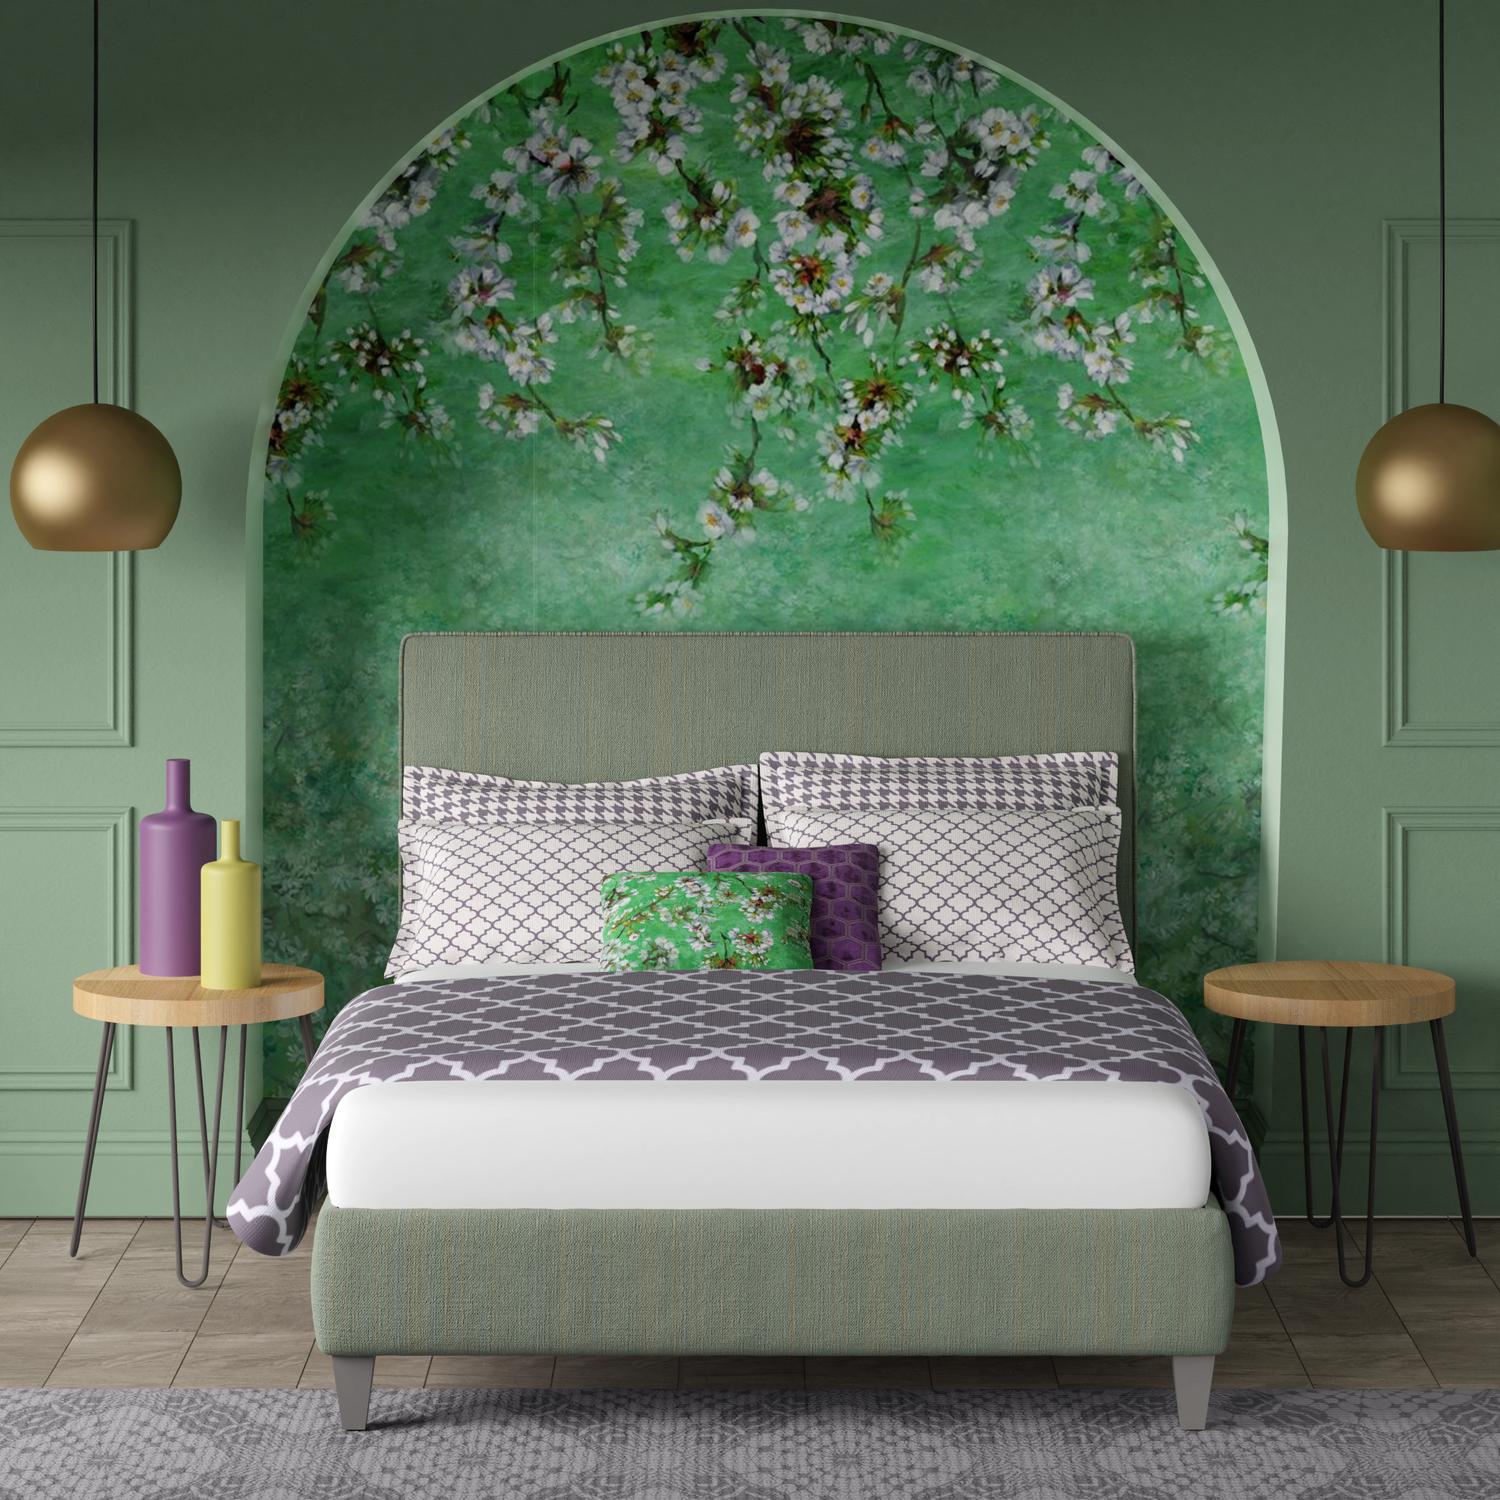 Yushan upholstered bed - Image Green